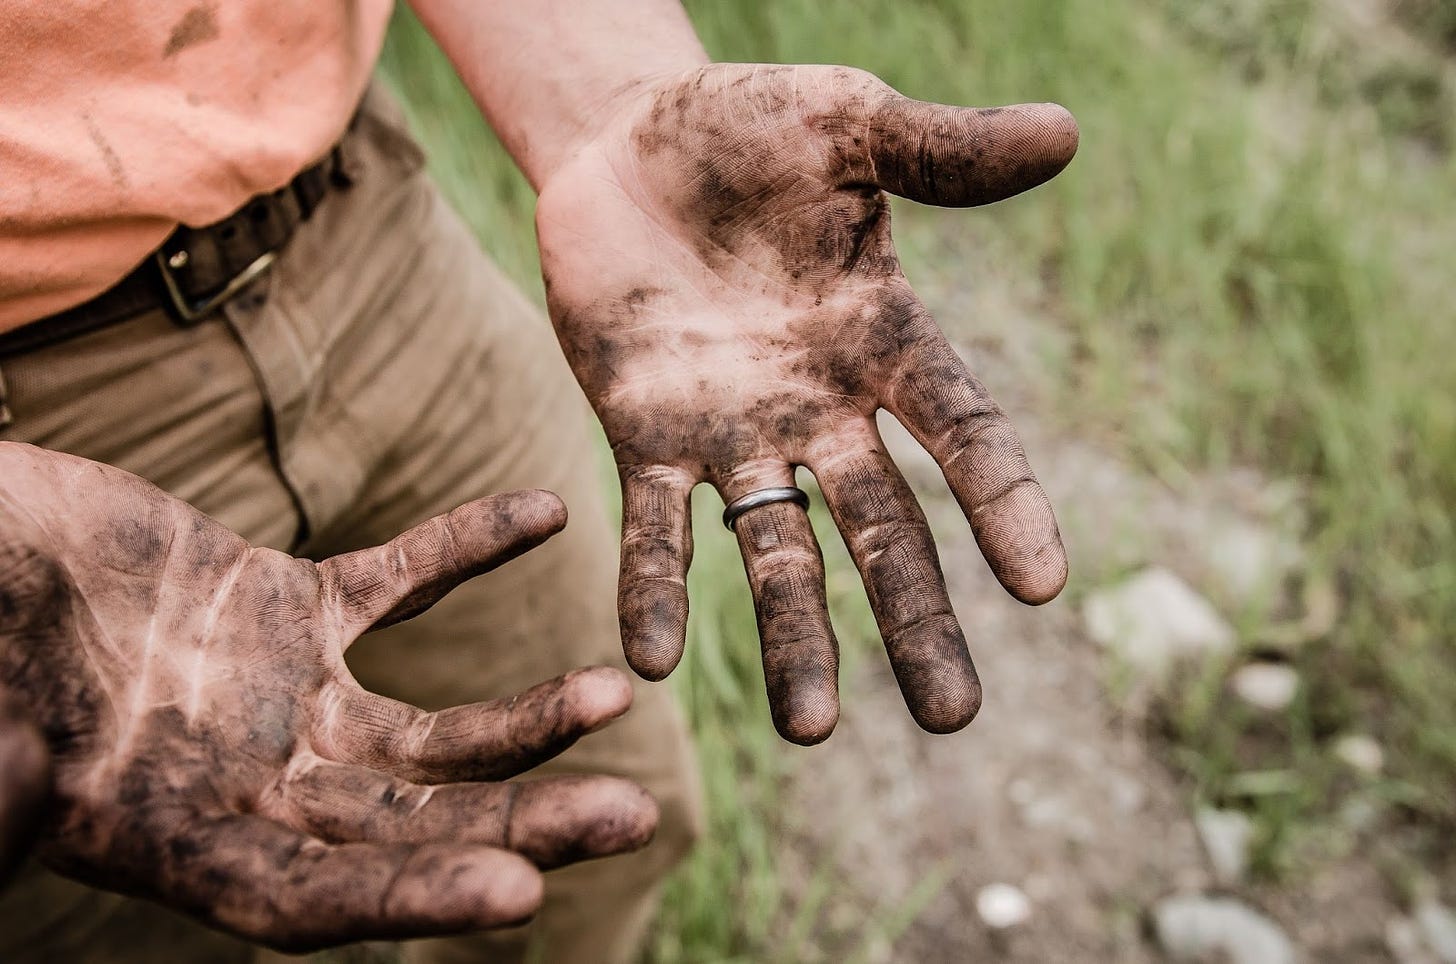 a photo of two hands covered in dirt or grease.